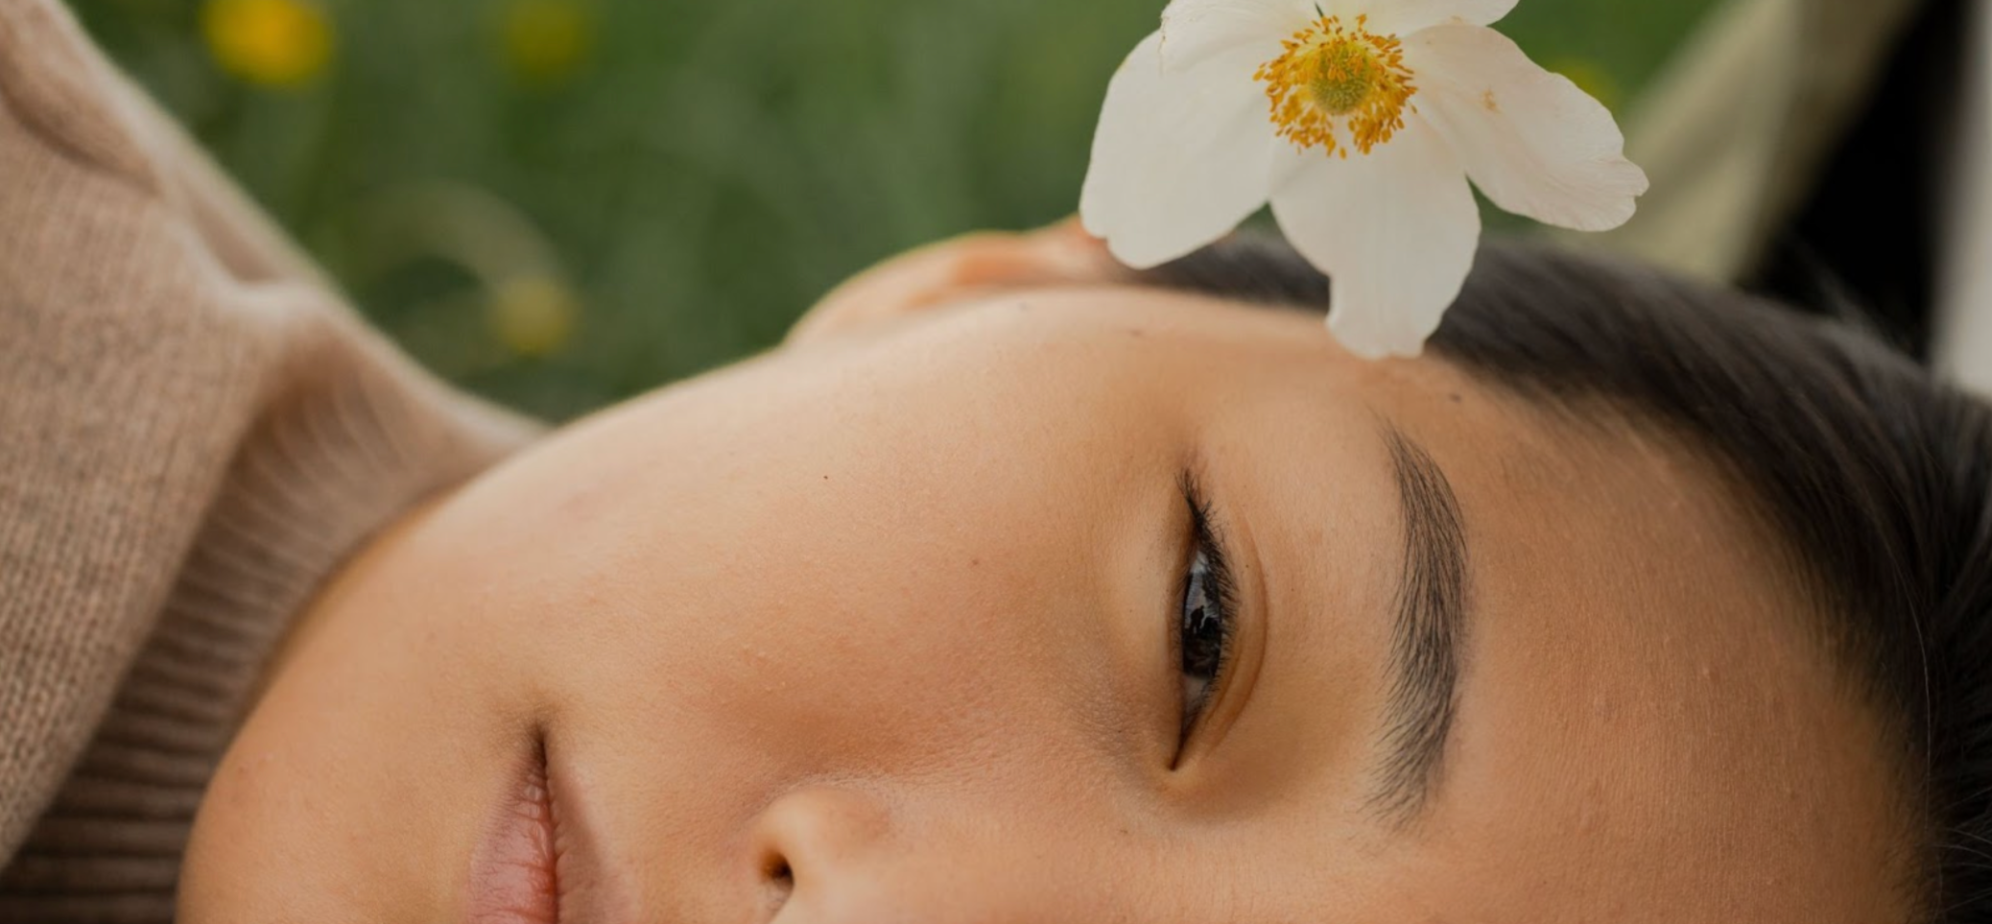 Asian woman lying down with a white flower in her hair